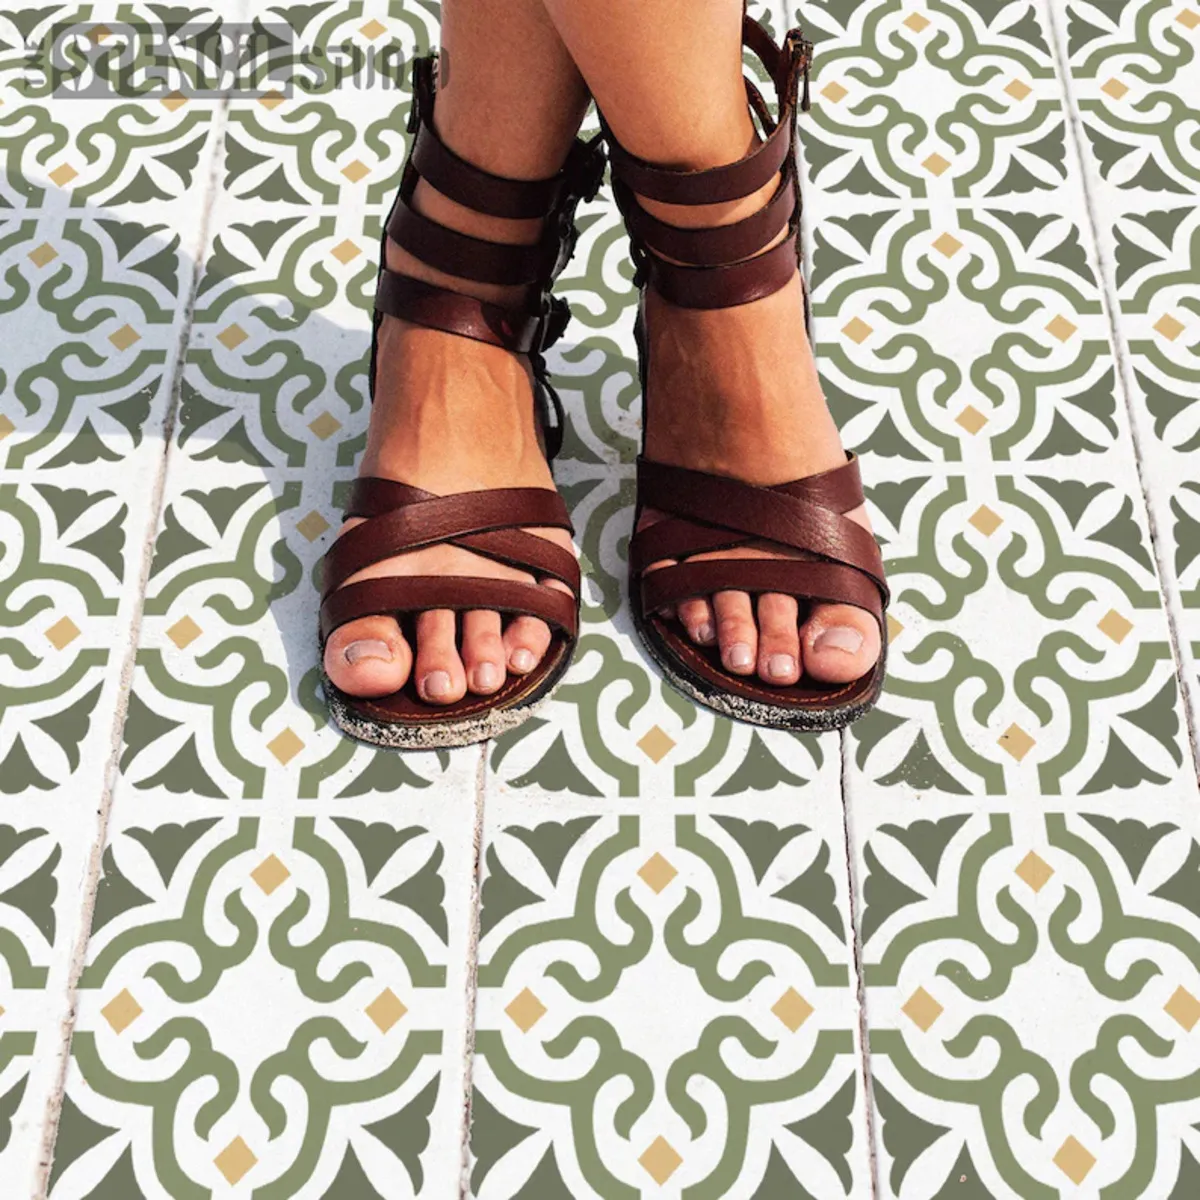 Woman's legs and feet in sandals standing on patterned tiled floor